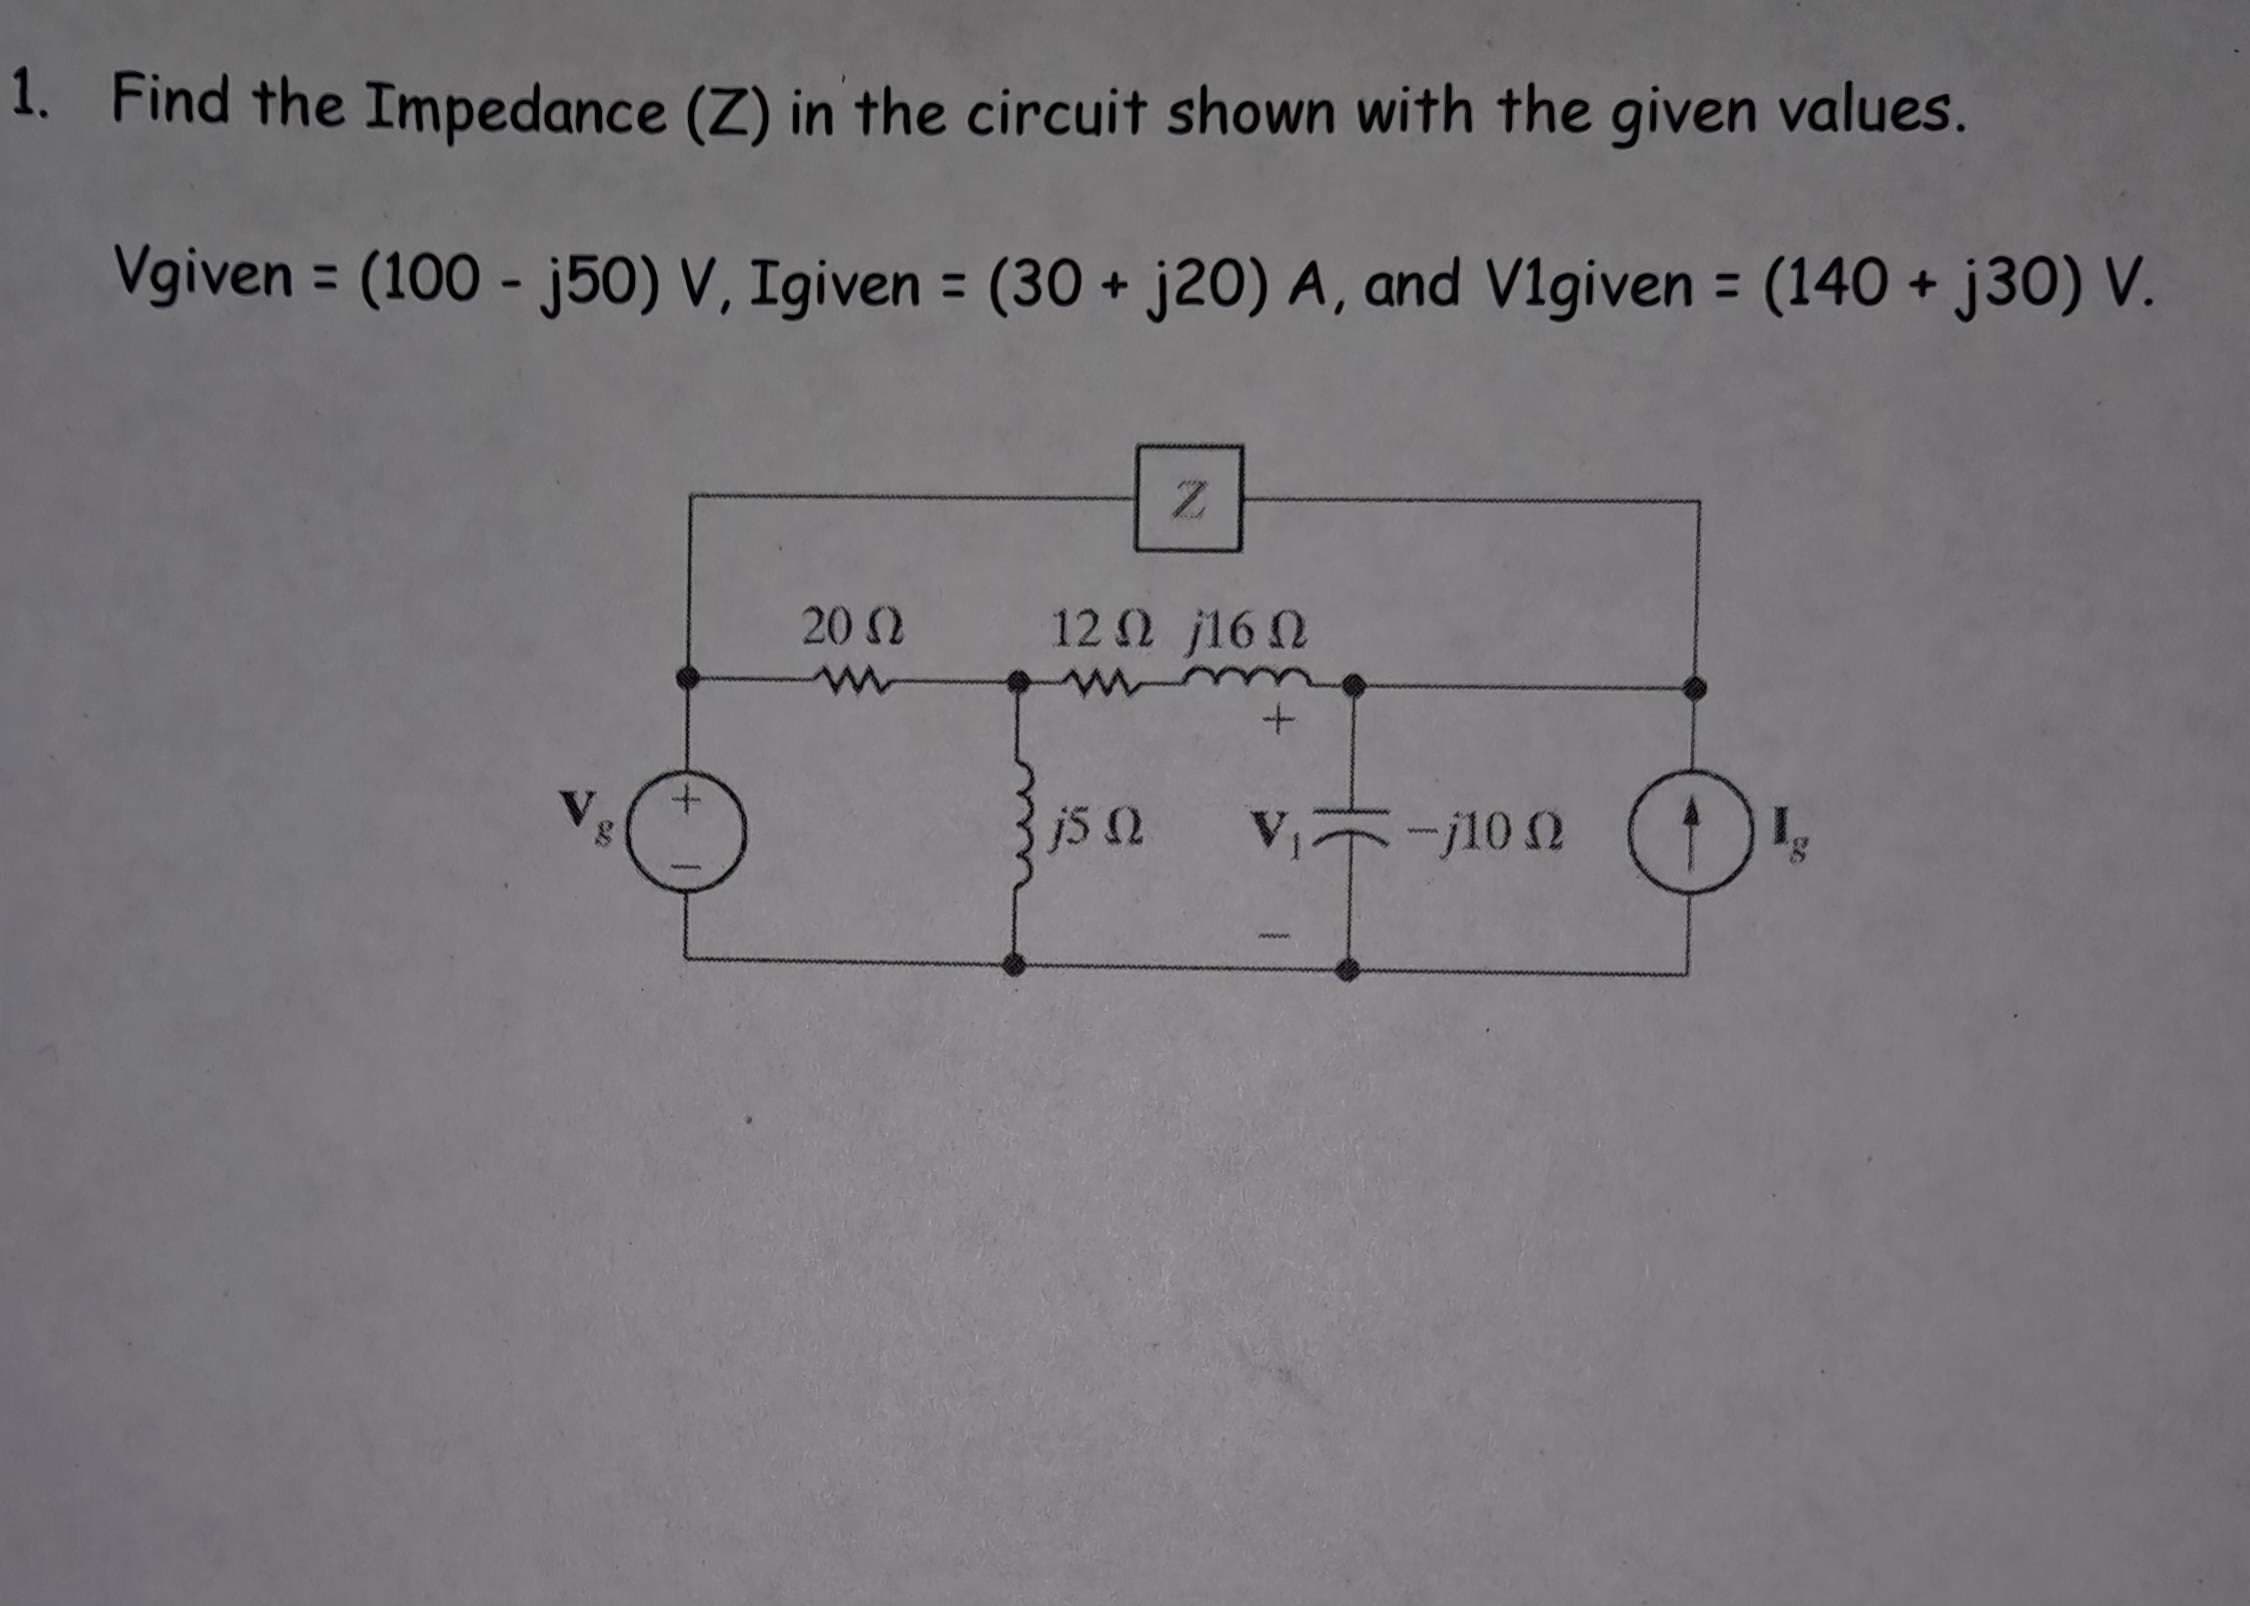 1. Find the Impedance (Z) in the circuit shown with the given values.
=
Vgiven (100 - j50) V, Igiven = (30+ j20) A, and V1given (140+ j30) V.
=
V
Z
2002
w
12Ω 16Ω
j5Q
+
V₁-j10 2
100 C
22